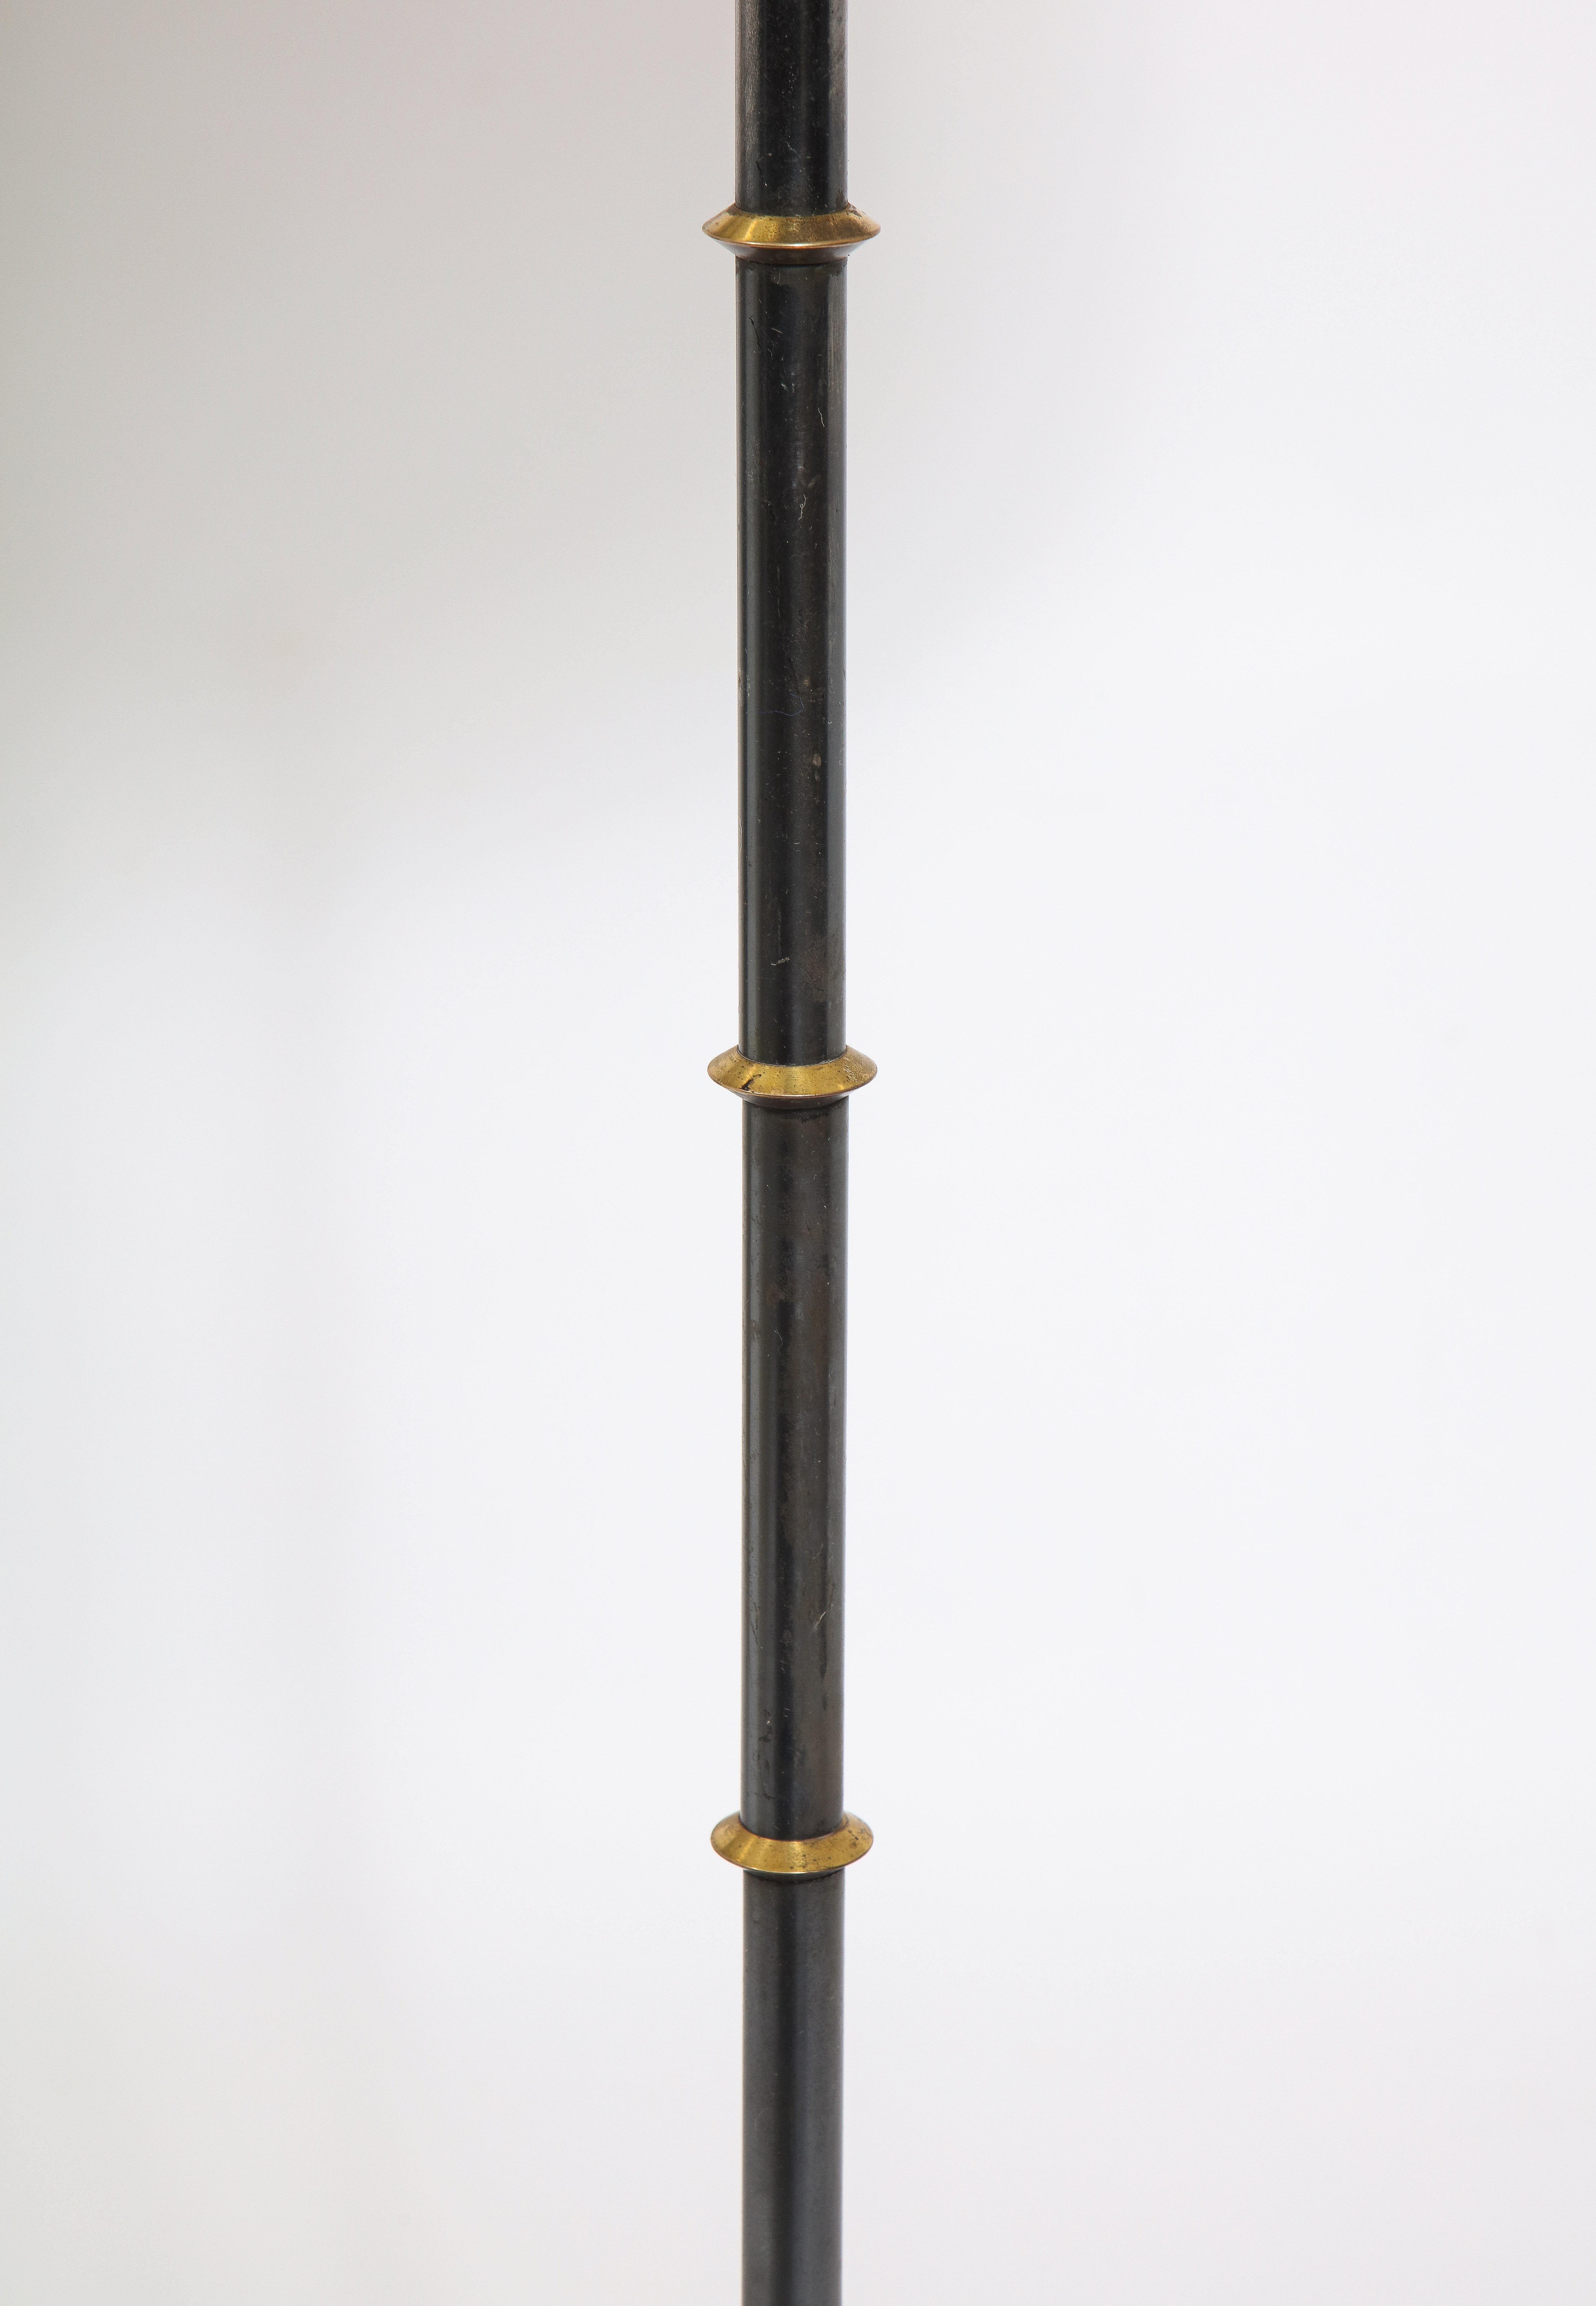 Mid-20th Century Adjustable Height Floor Lamp by Gilles Sermadiras, France, 1950's For Sale